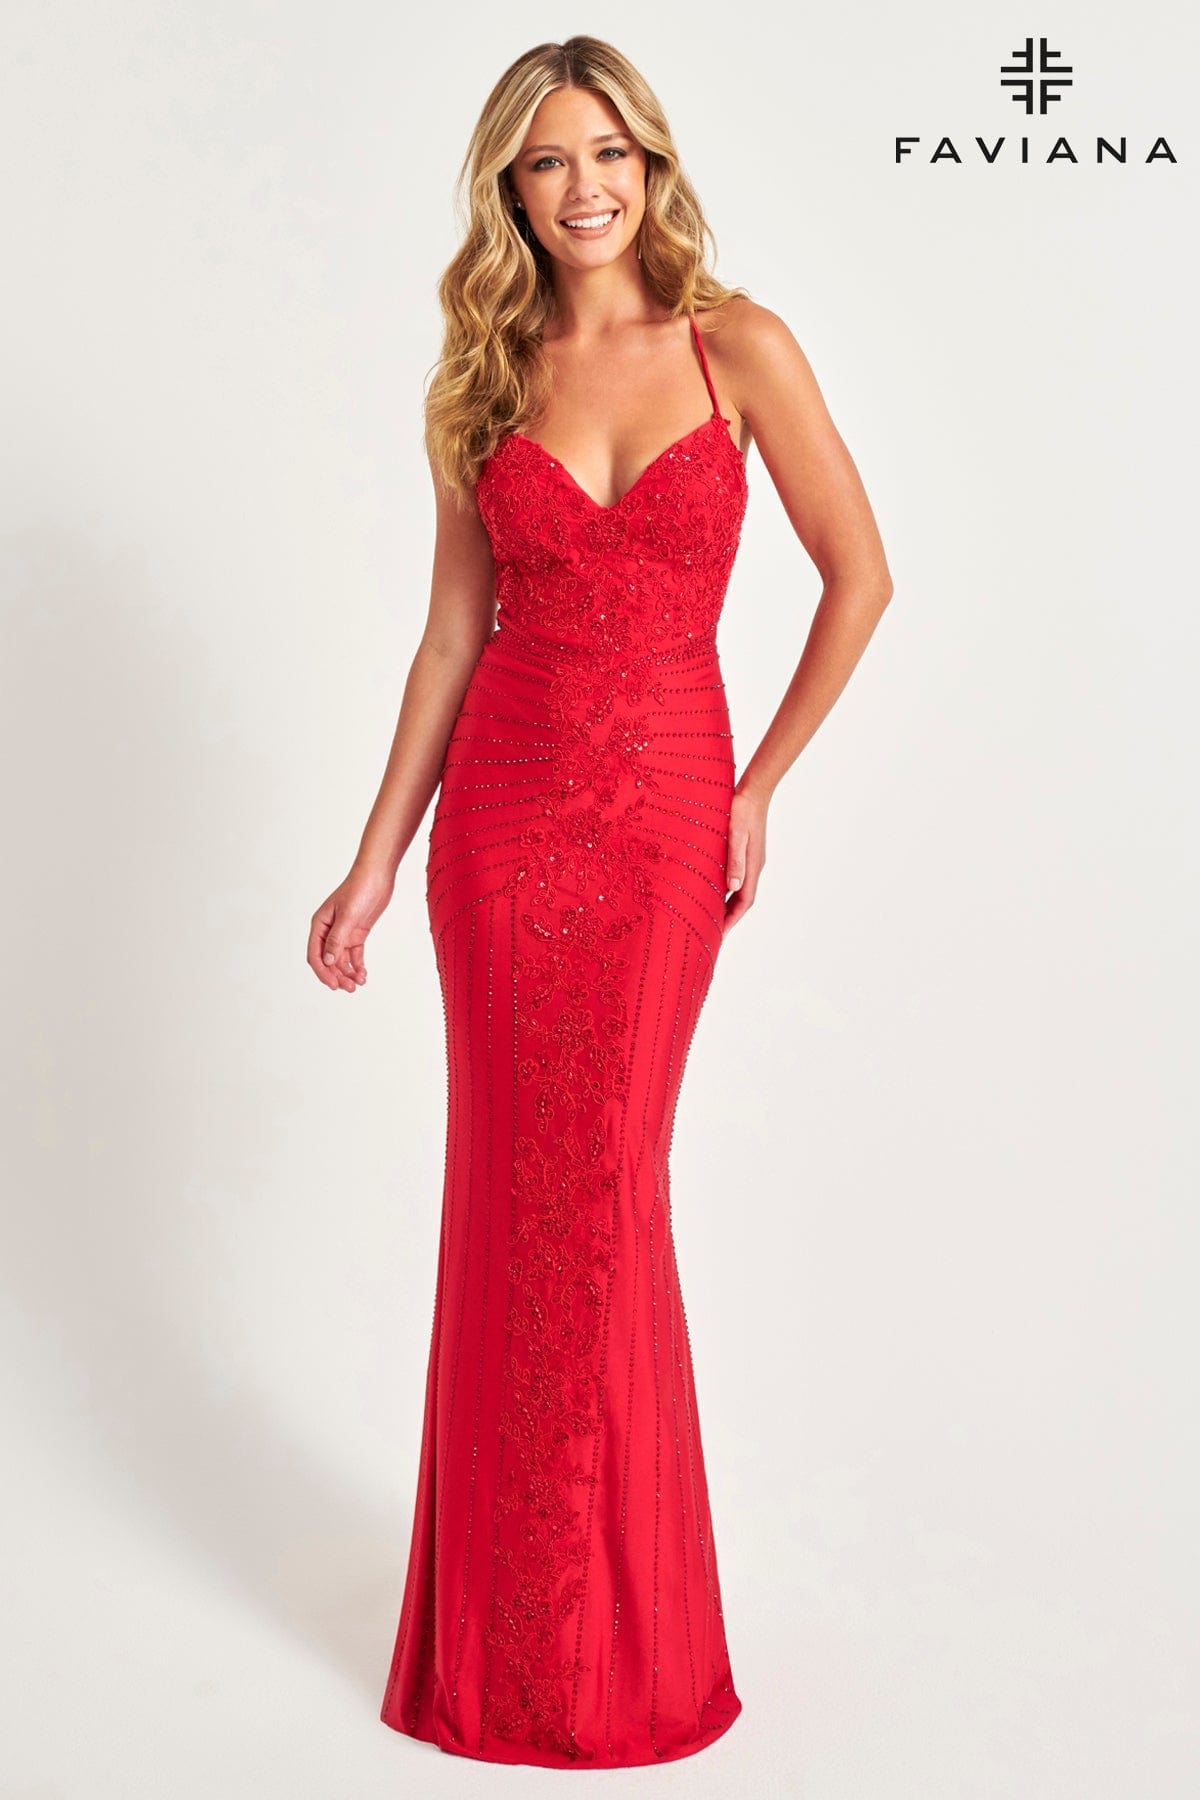 Unique Prom Dress With Lace And Hotfix Rhinestone Patterned Detailing